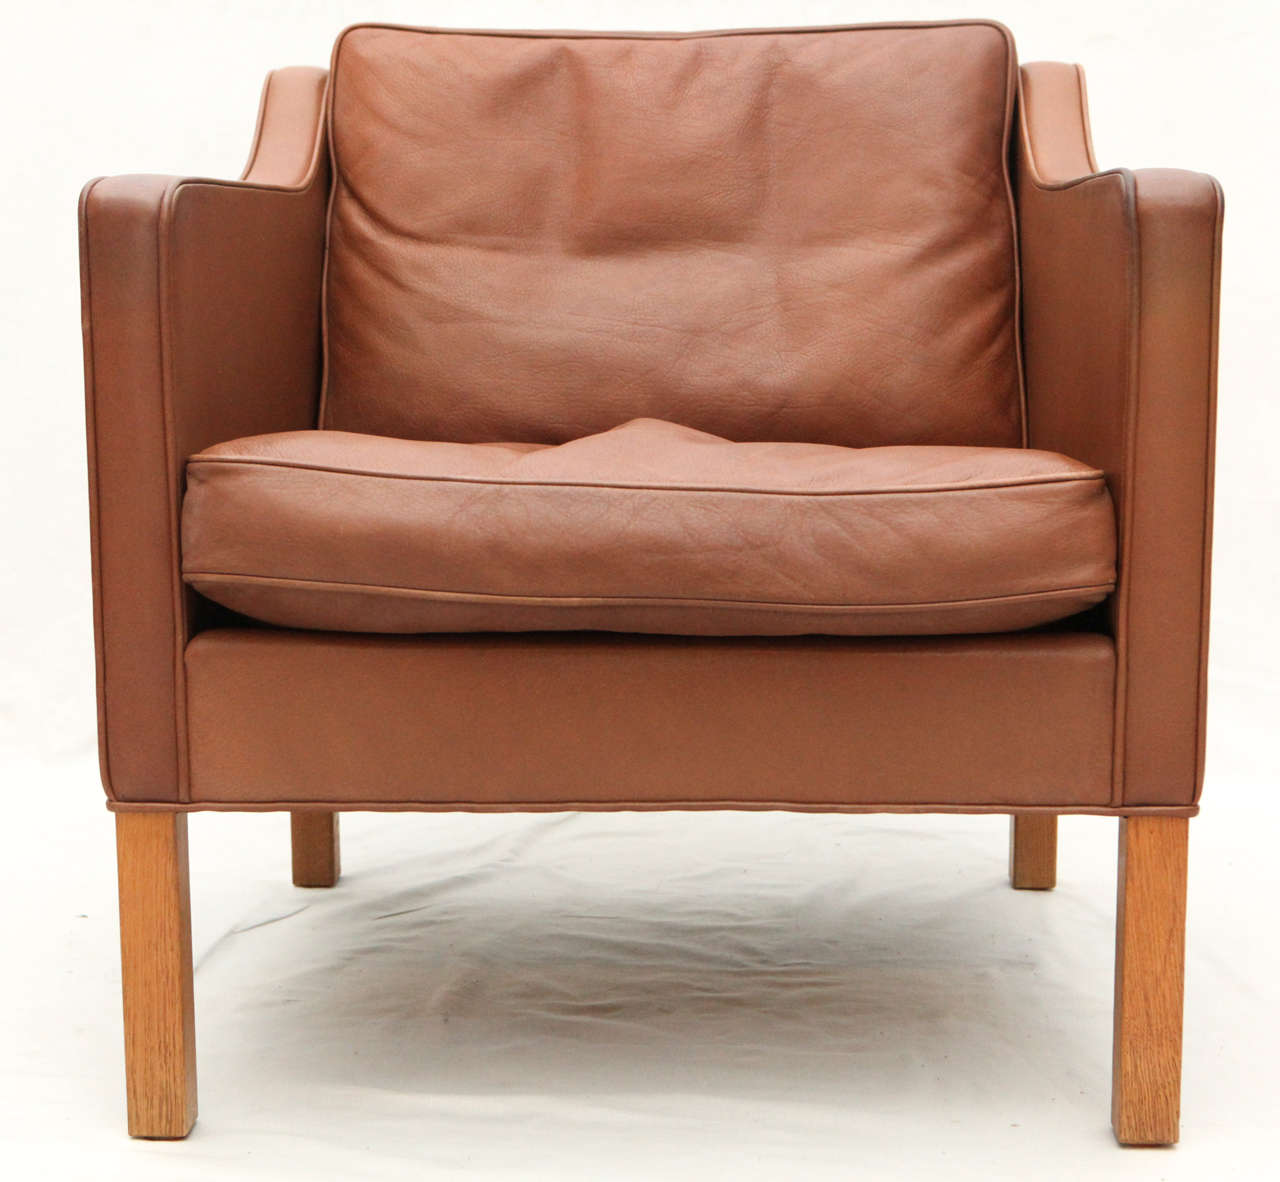 Borge Mogensen leather lounge chair produced by Fredericia.  Store formerly known as ARTFUL DODGER INC